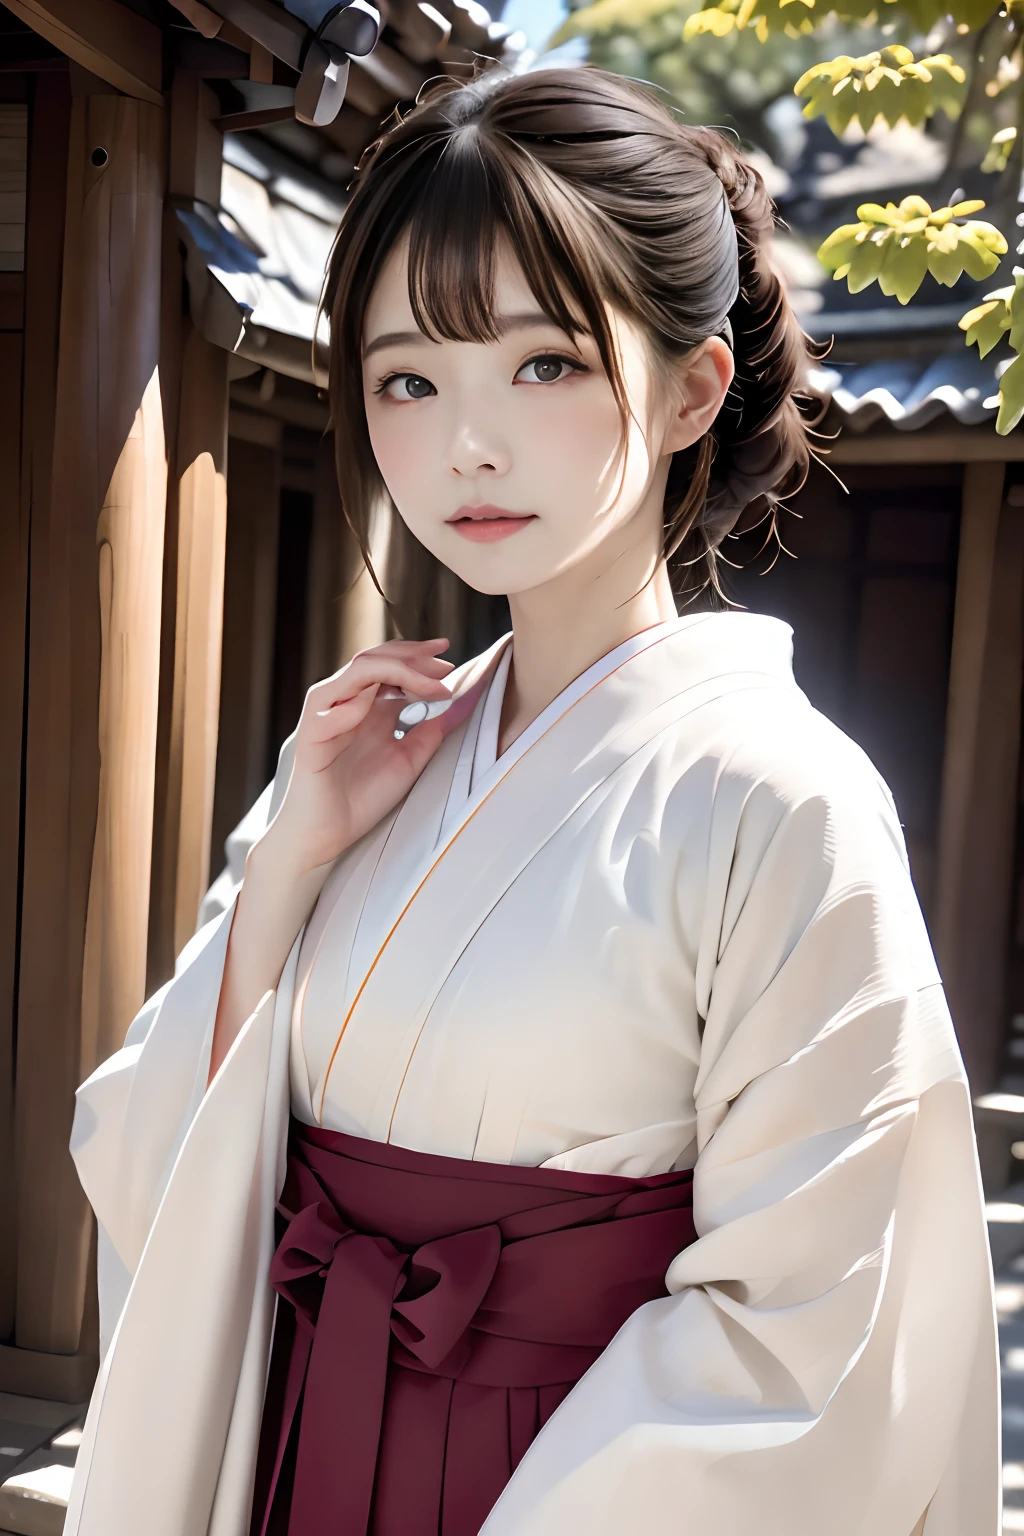 top-quality、masuter piece、ultra-detailliert、8ｋ、RAW Photography、1 beautiful Japan woman、beautiful countenance、Beautiful facial features、Beautifully dressed kimono、Woman in kimono、Textured skin、high detailing、Ladies and gentlemen、Temples in Kyoto、temple、Shrine precincts